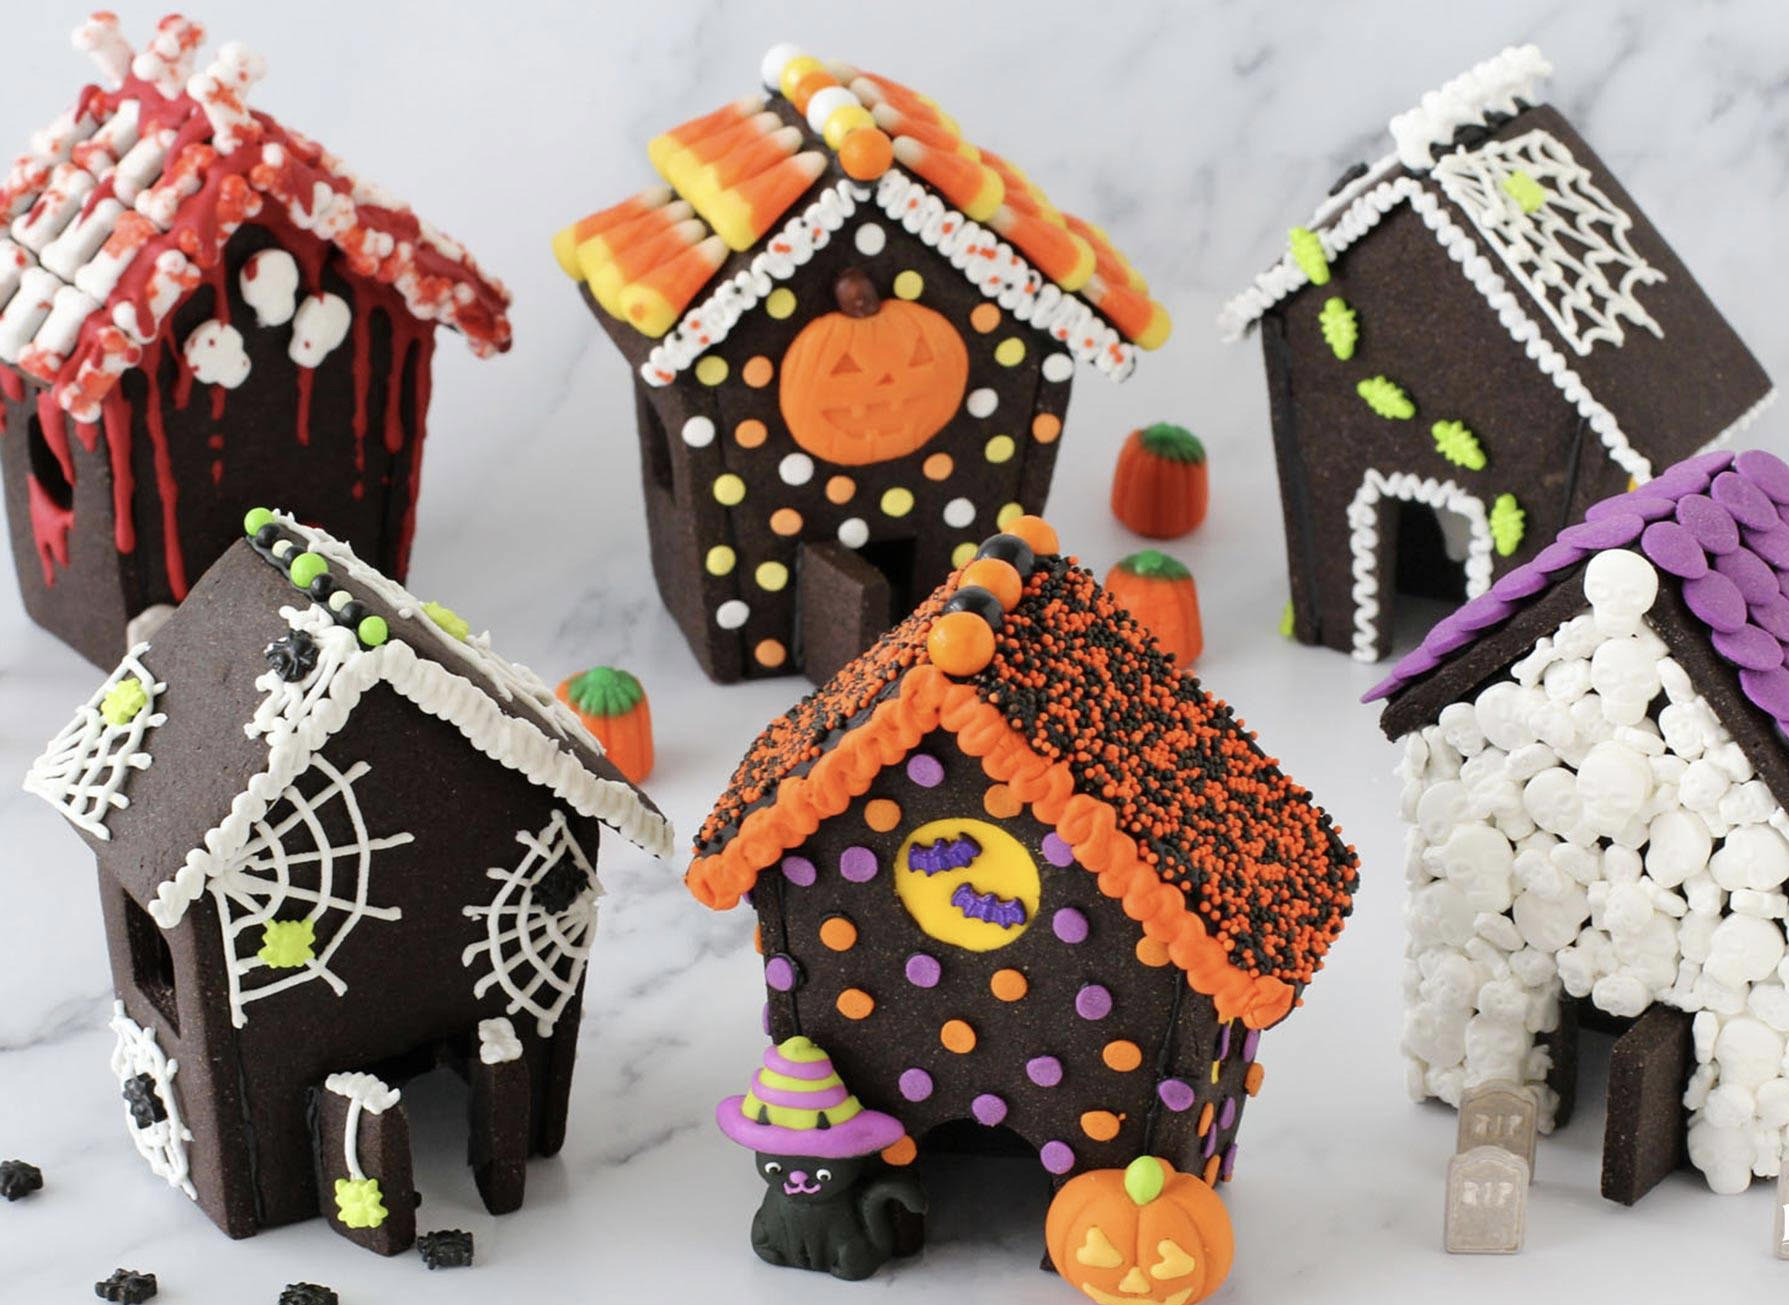 Haunted Gingerbread House Decorating @Newmarket by Creative Twist Events